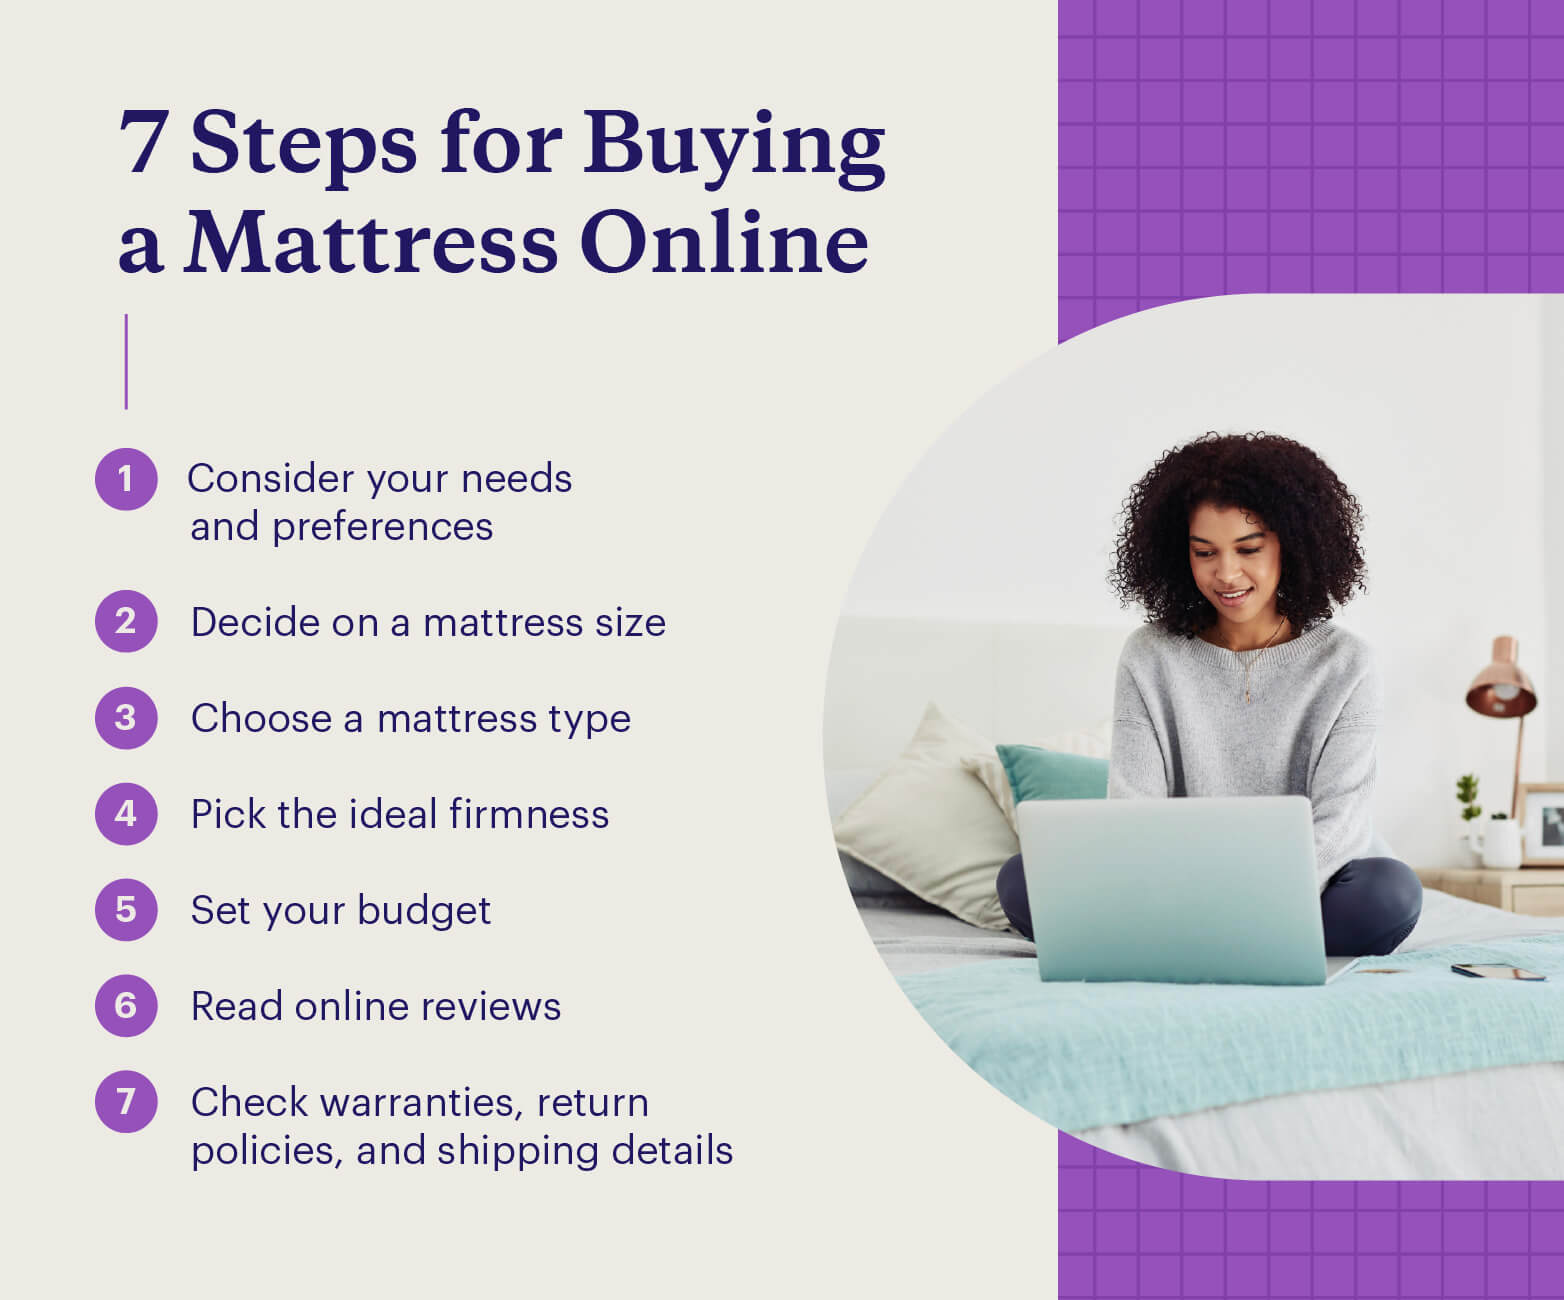 Graphic depicting 7 steps to buying a mattress online.